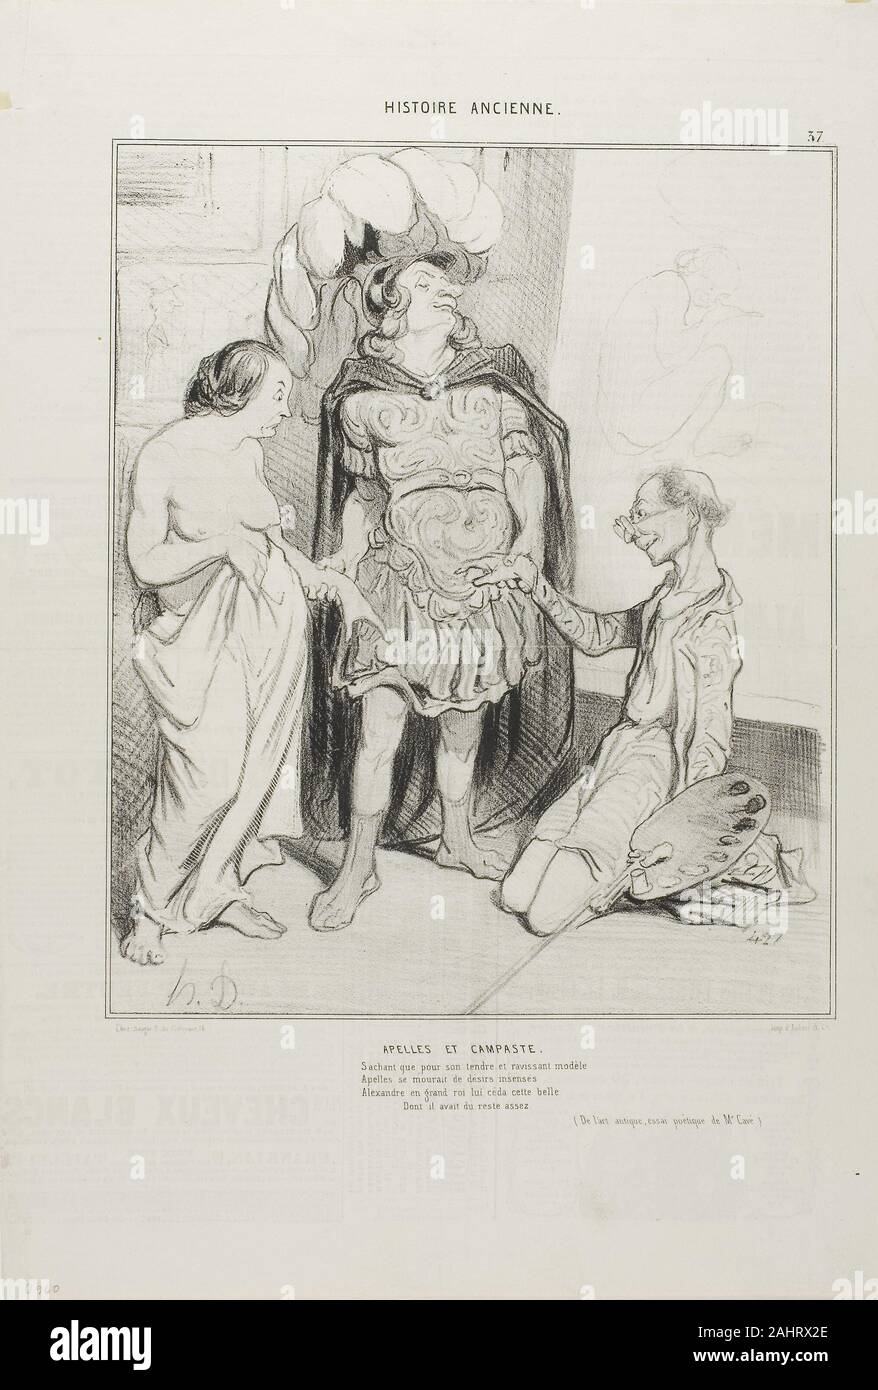 Honoré-Victorin Daumier. Apelles and Campaste. Aware that Apelles was  wasting away with love Alexander gave him Campeste and above the first art  deal ever now was struck girlfriend against sculpture, oh what